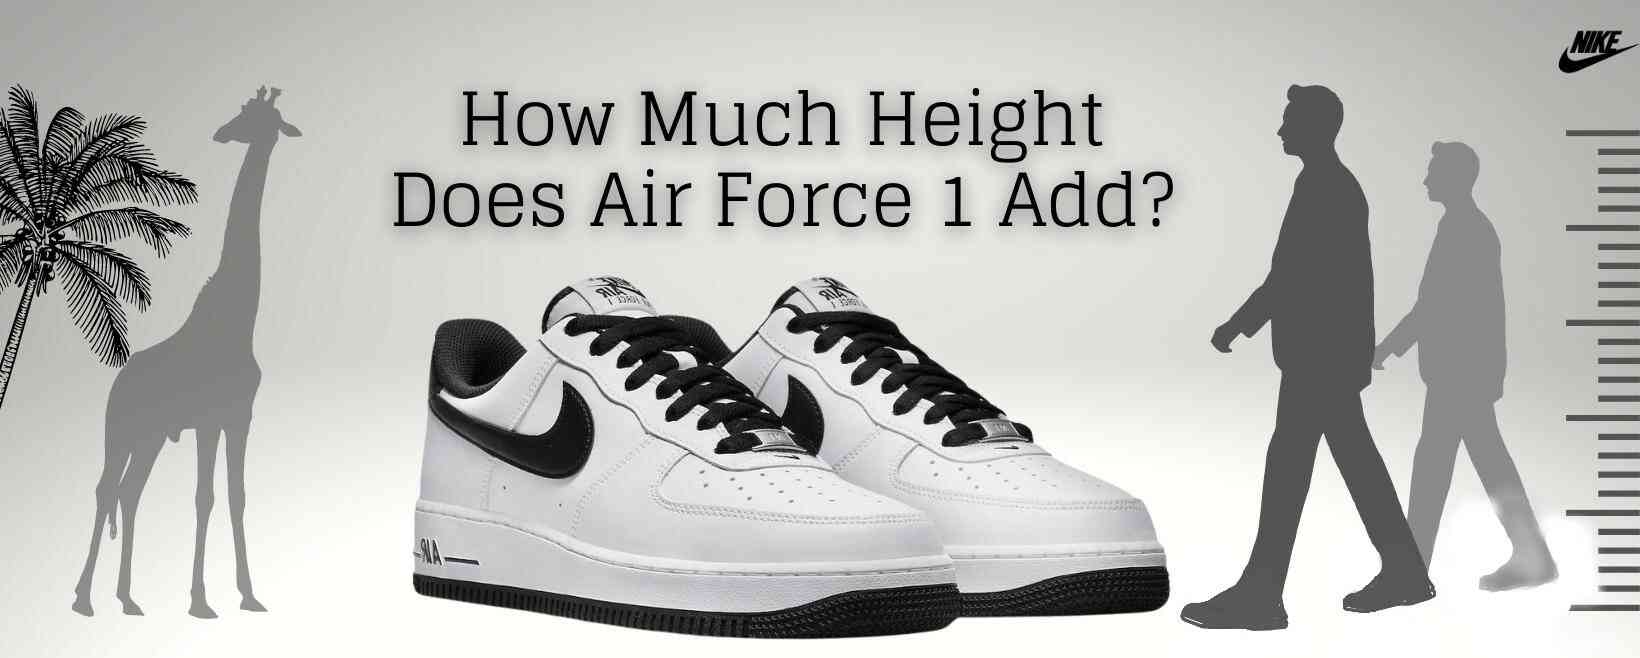 how much height do air force 1 add